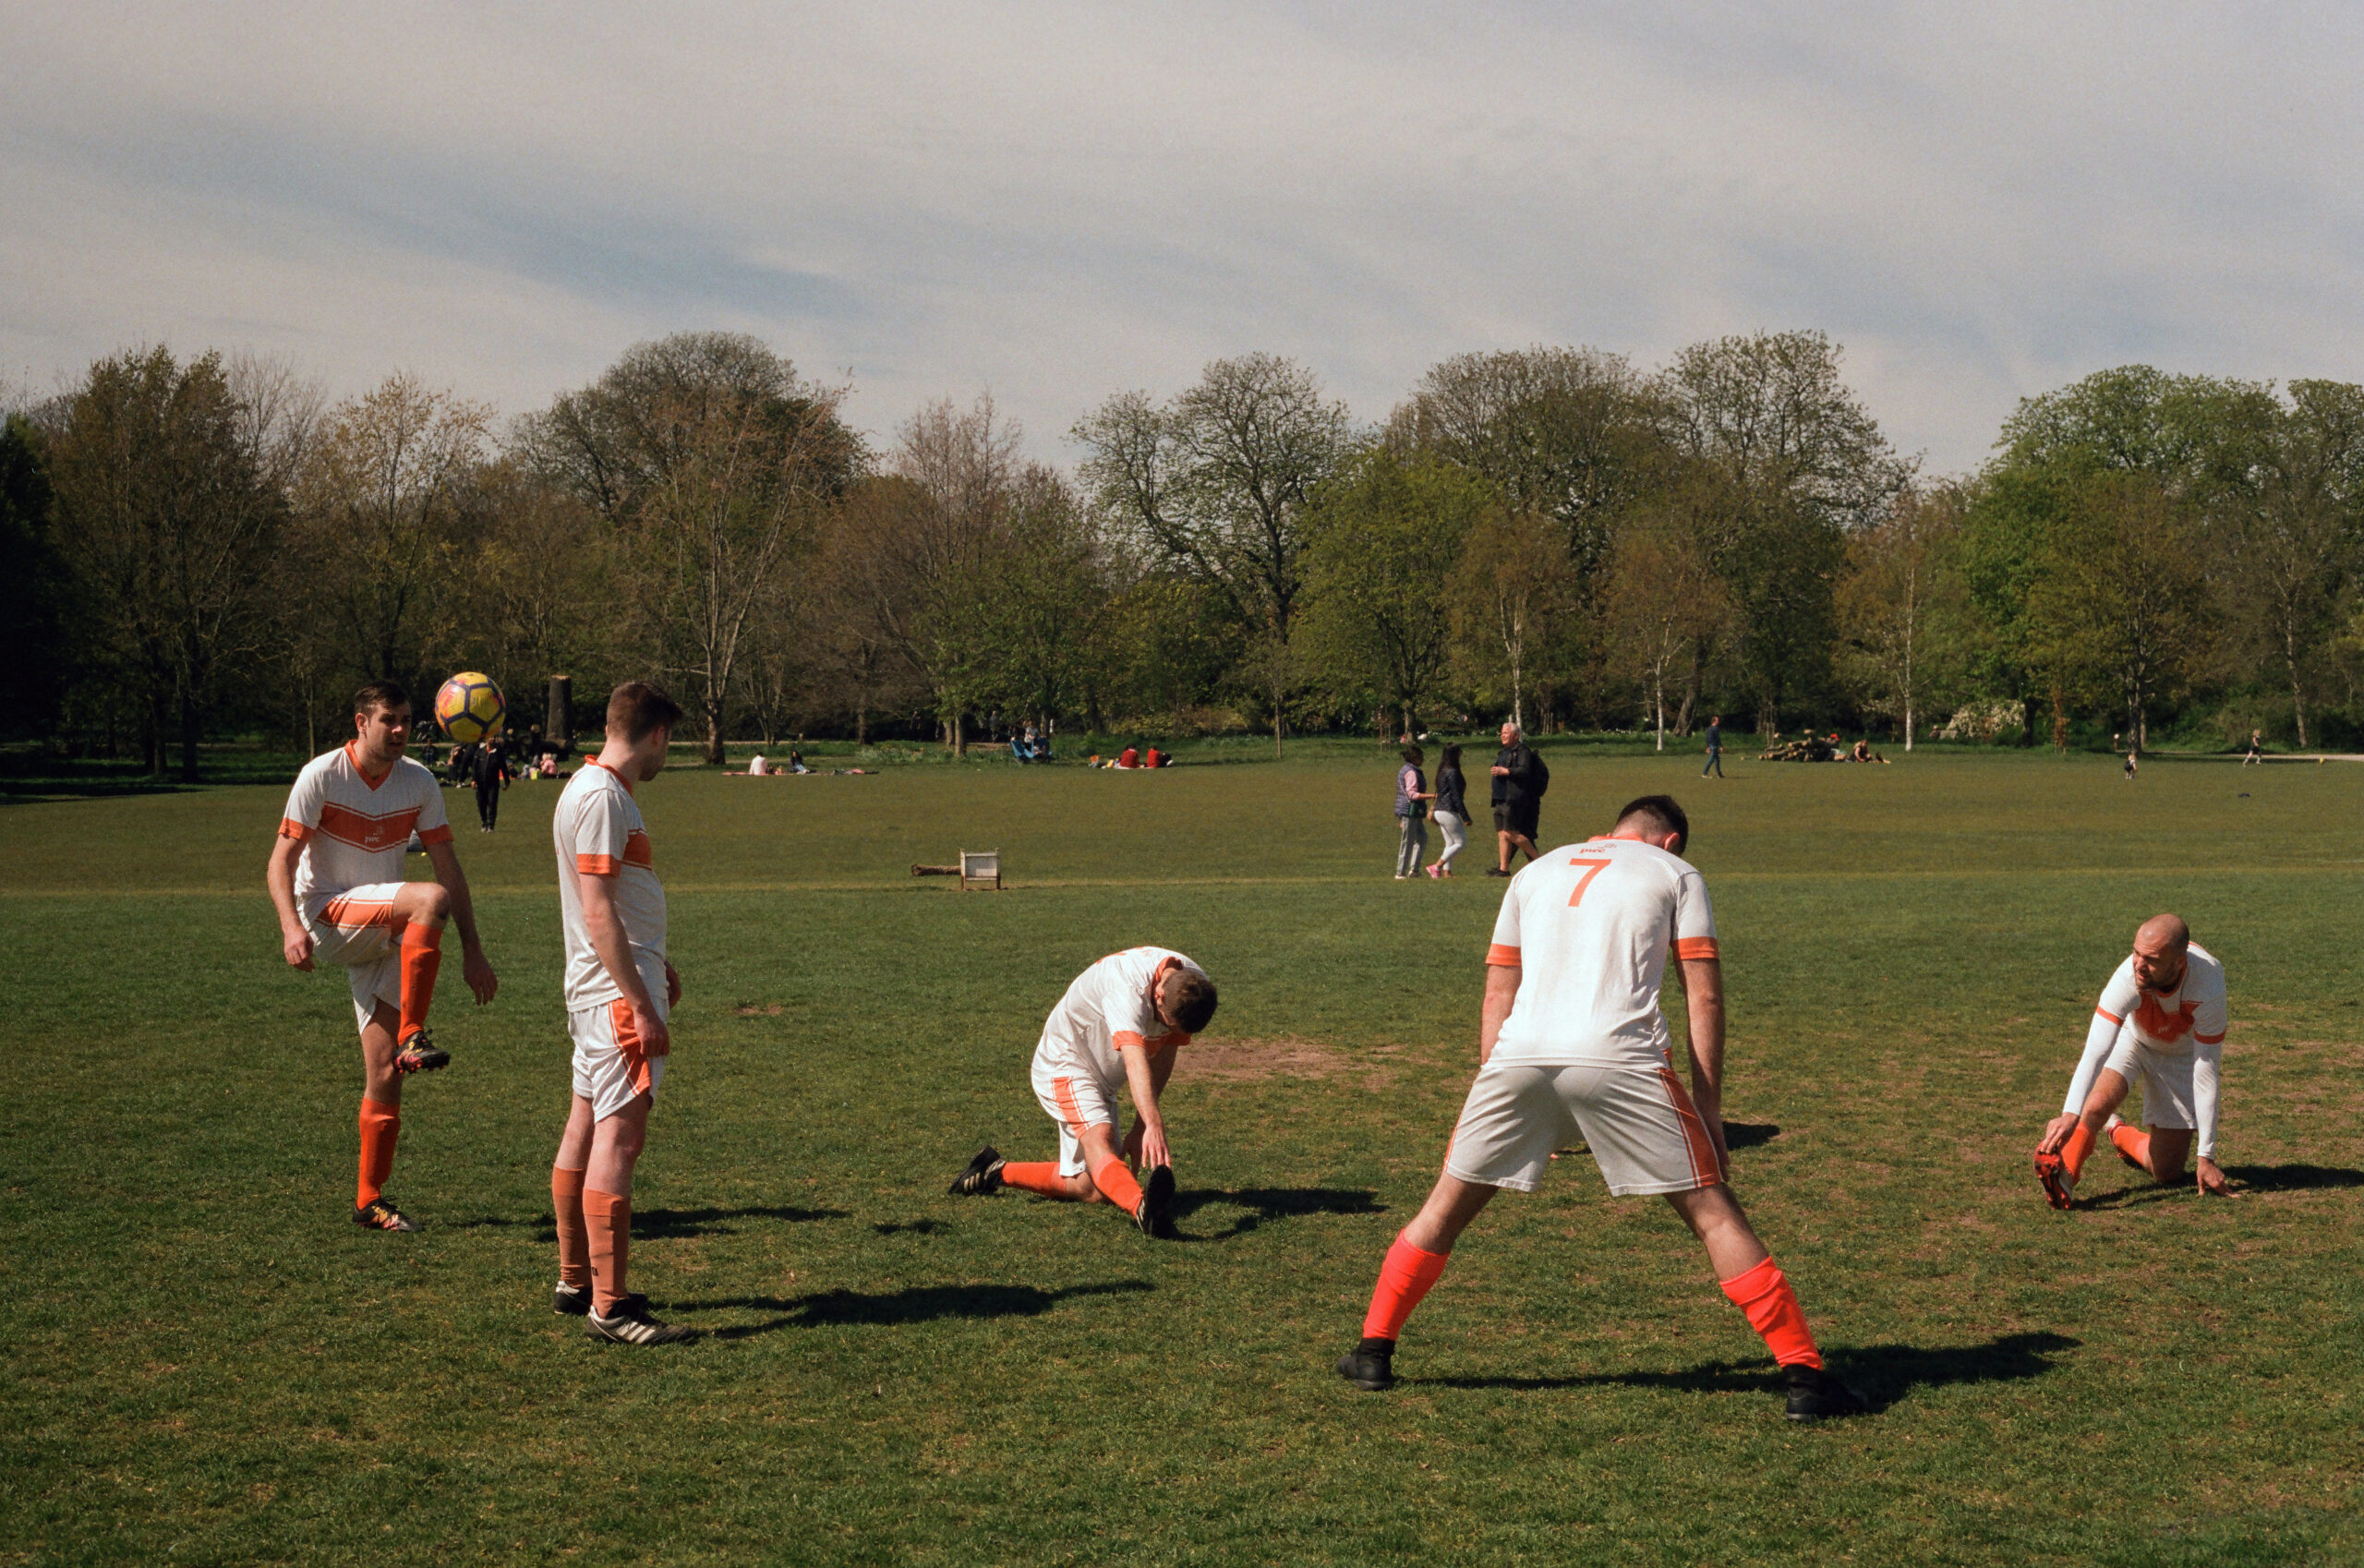 WHATEVER HAPPENED TO MEN'S SUNDAY LEAGUE?